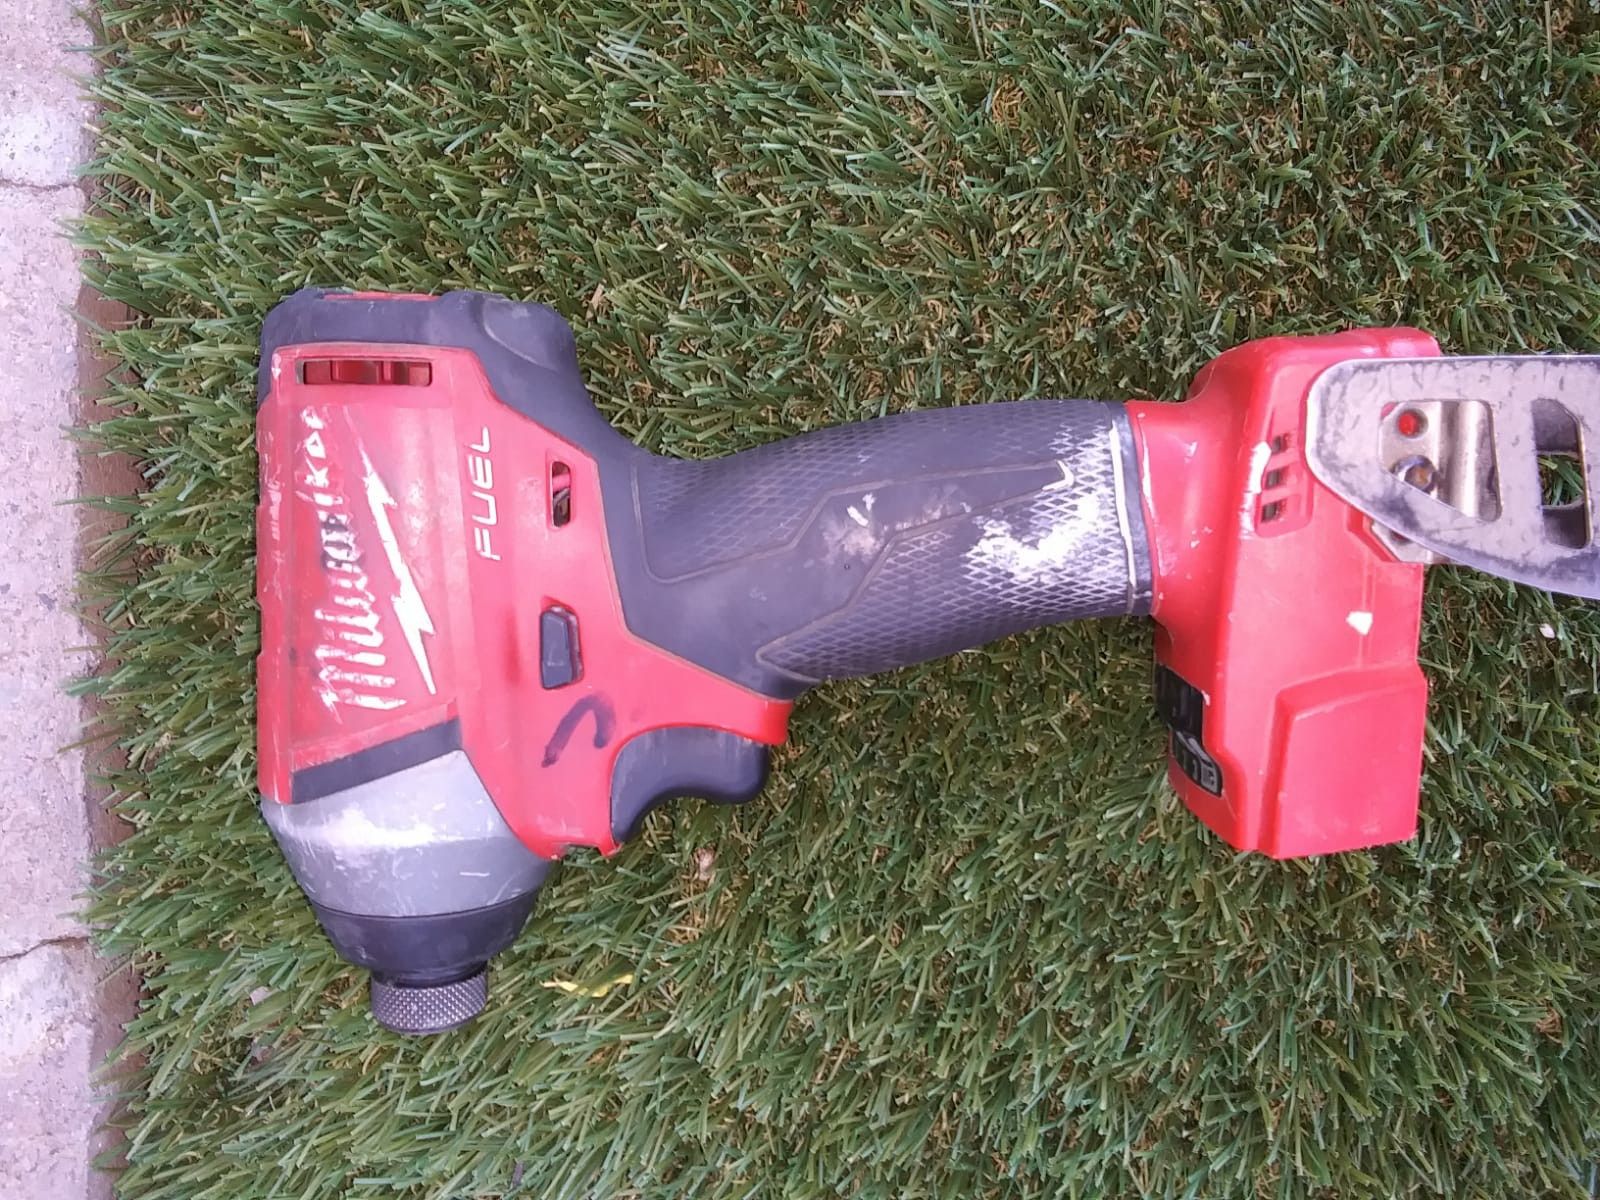 IMPACT DRILL MILWAUKEE FUEL BATTERY NOT INCLUDED